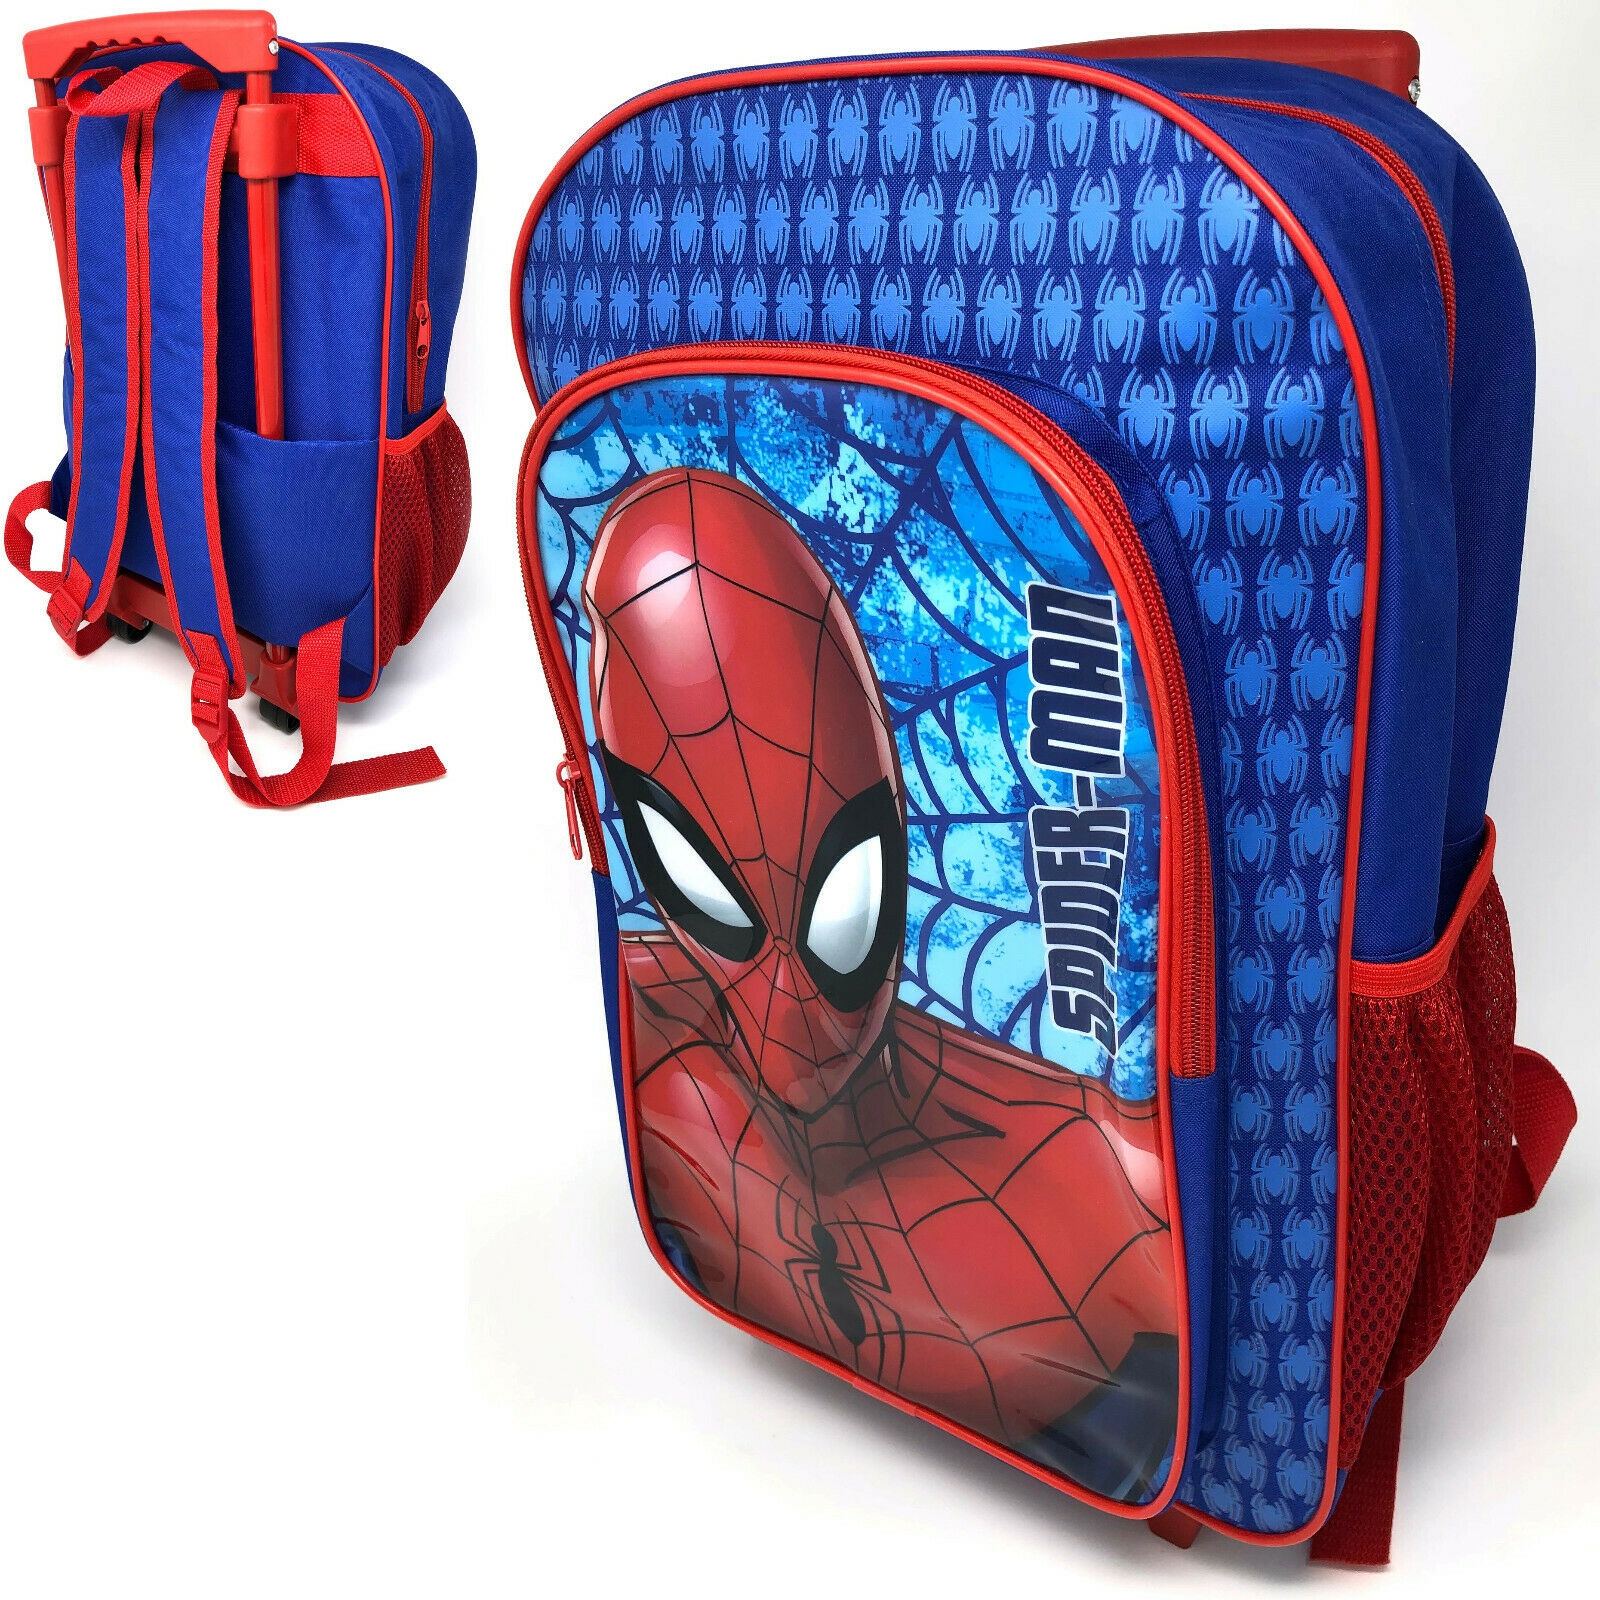 Spiderman Red & Blue Luggage Deluxe School Travel Trolley Roller Wheeled Bag